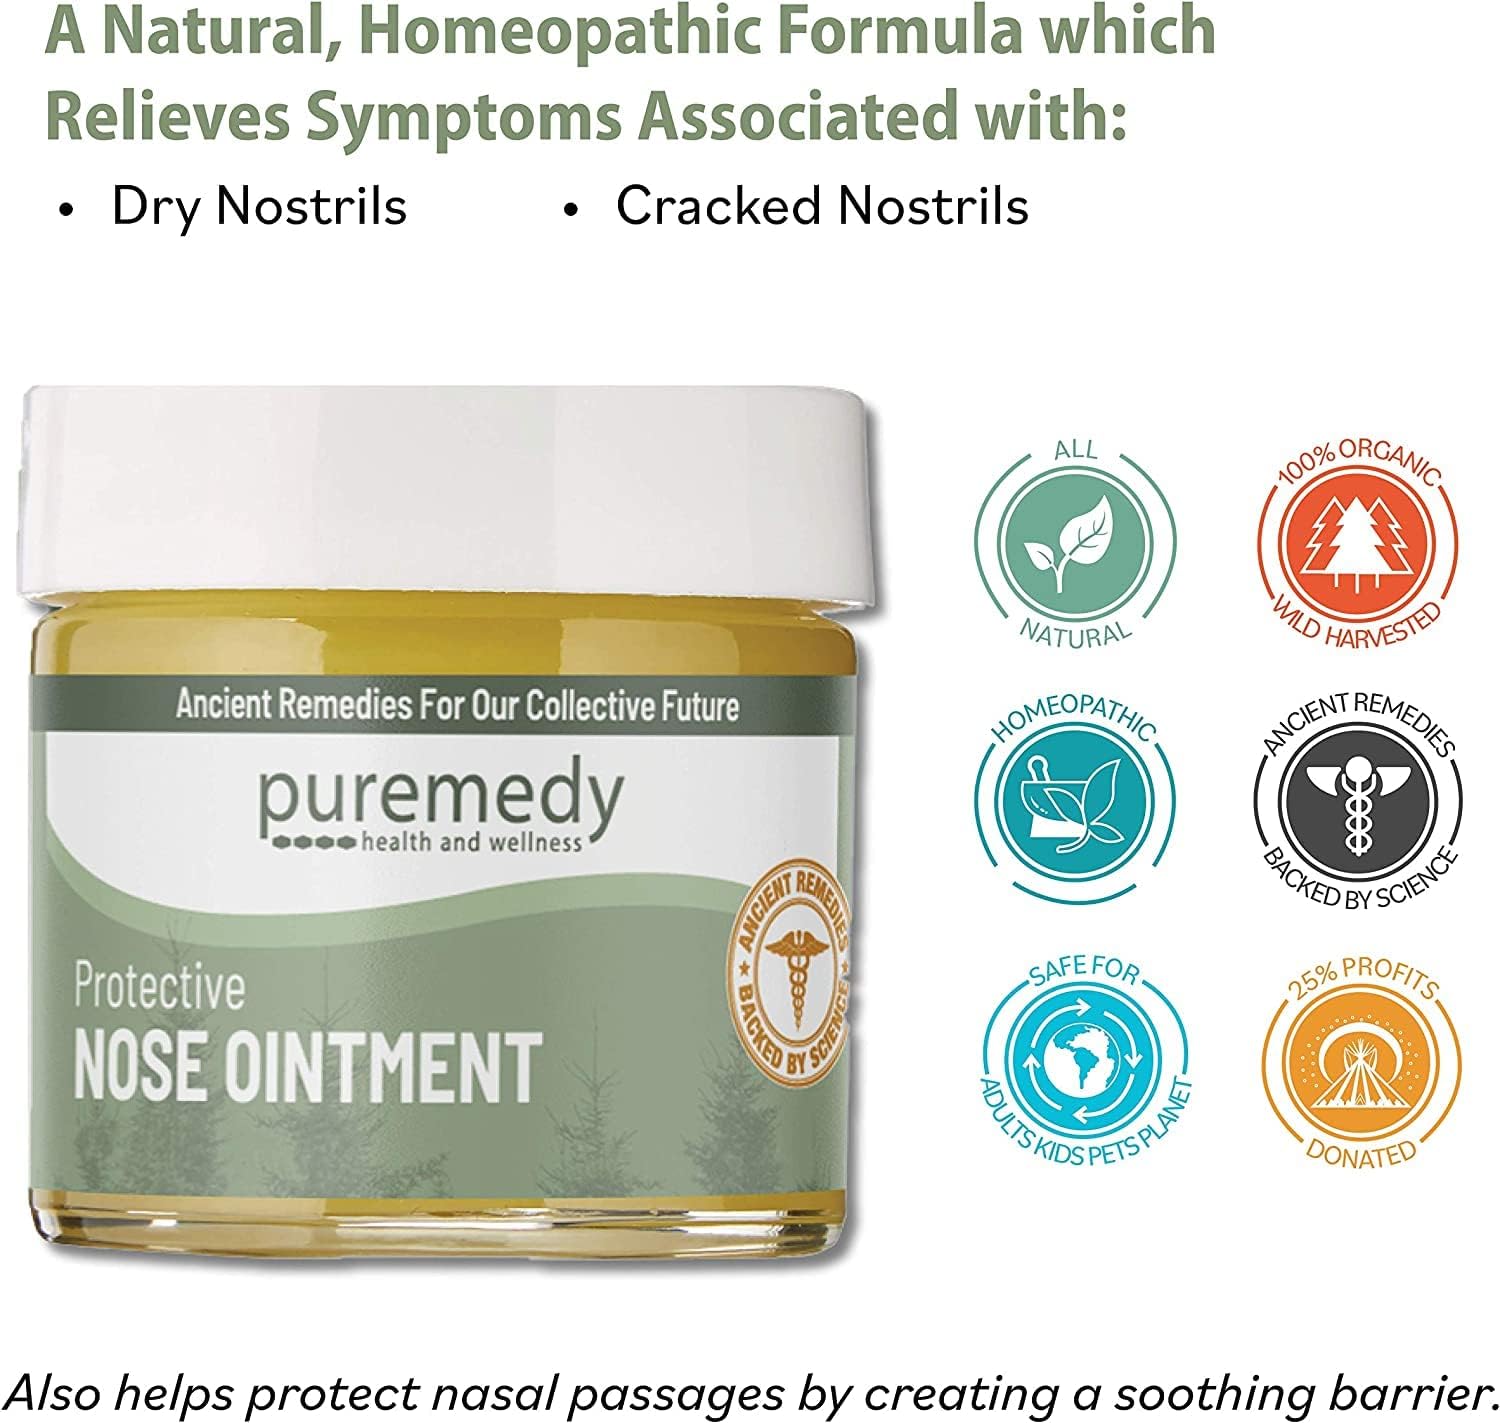 Puremedy Protective Nose Ointment, All Natural Homeopathic Nasal Skin Salve Sooths and Relieve Symptoms of Dry, Cracked, and Sore Nostrils, Creates Protective Barrier, 1 oz. (Pack of 1) : Health & Household